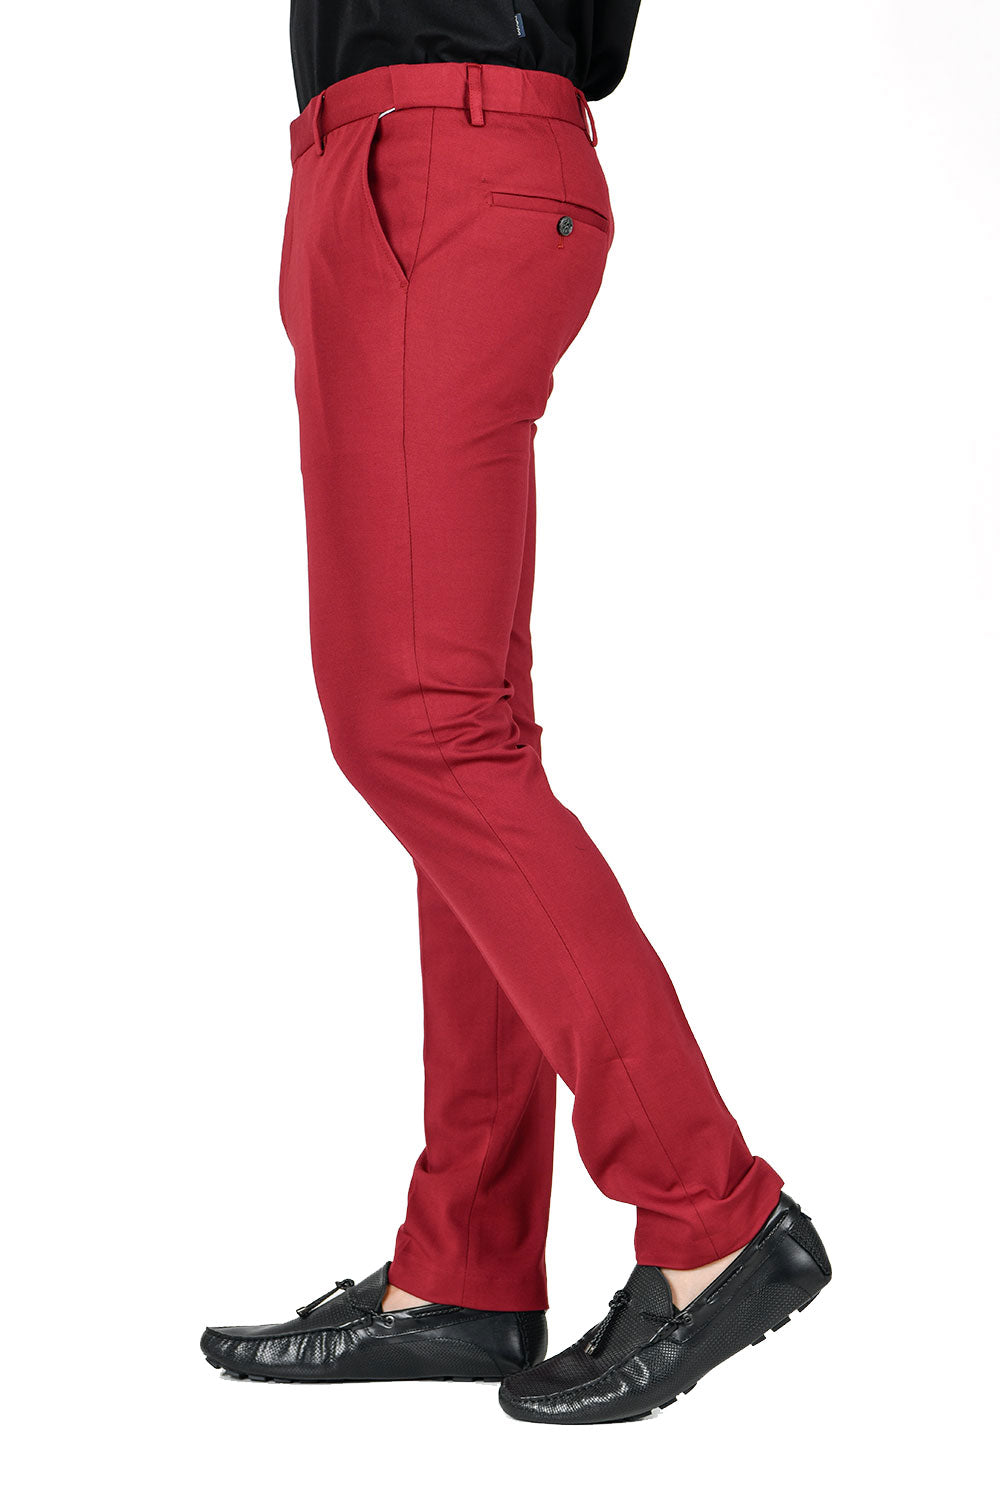 Barabas Men's Solid Color Basic Essential Chino Dress Pants CP4007 Wine